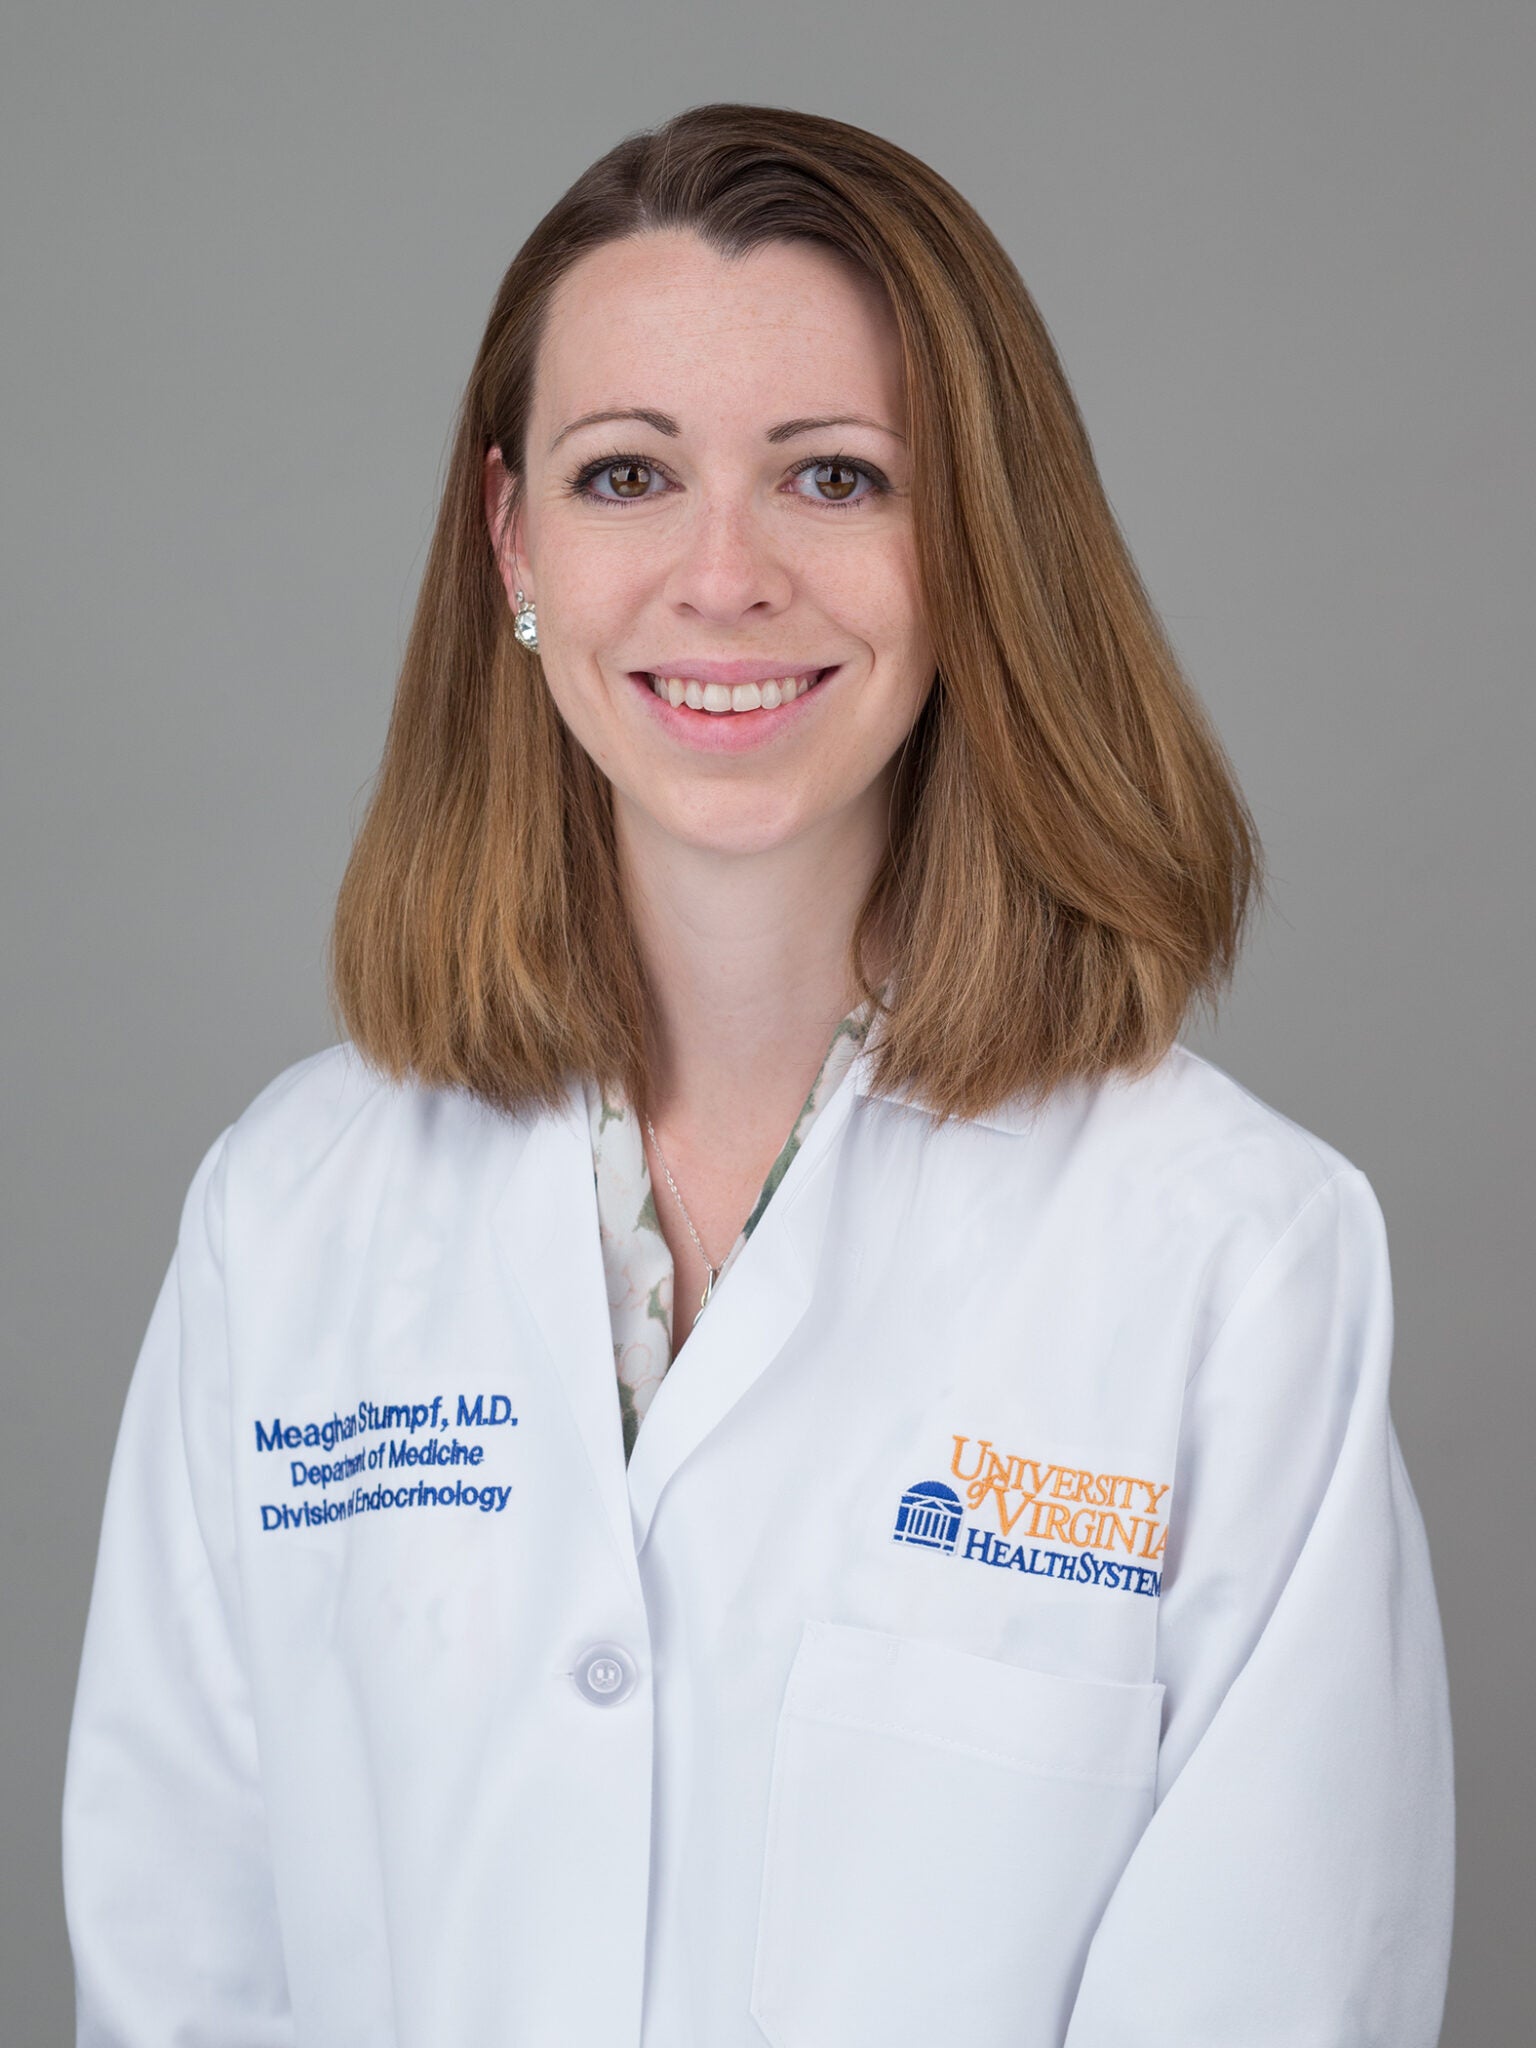 Meaghan Stumpf, MD Center for Diabetes Technology